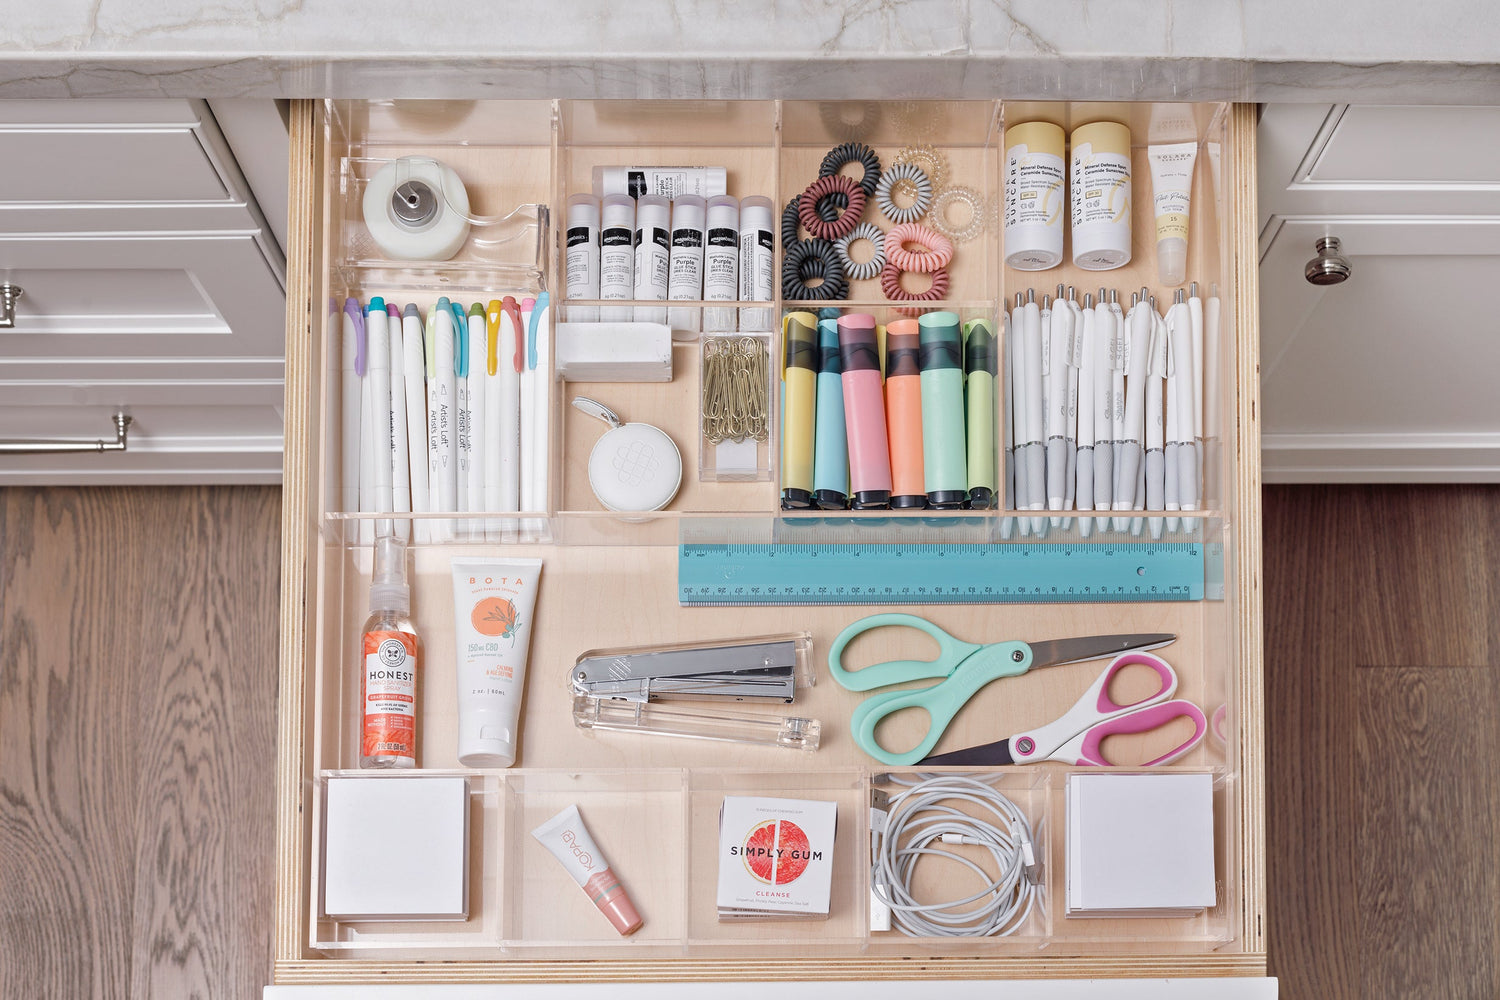 Neat and tidy office drawer using the Nathan custom-fit acrylic organizer to contain pens, cords, hair ties and other items.